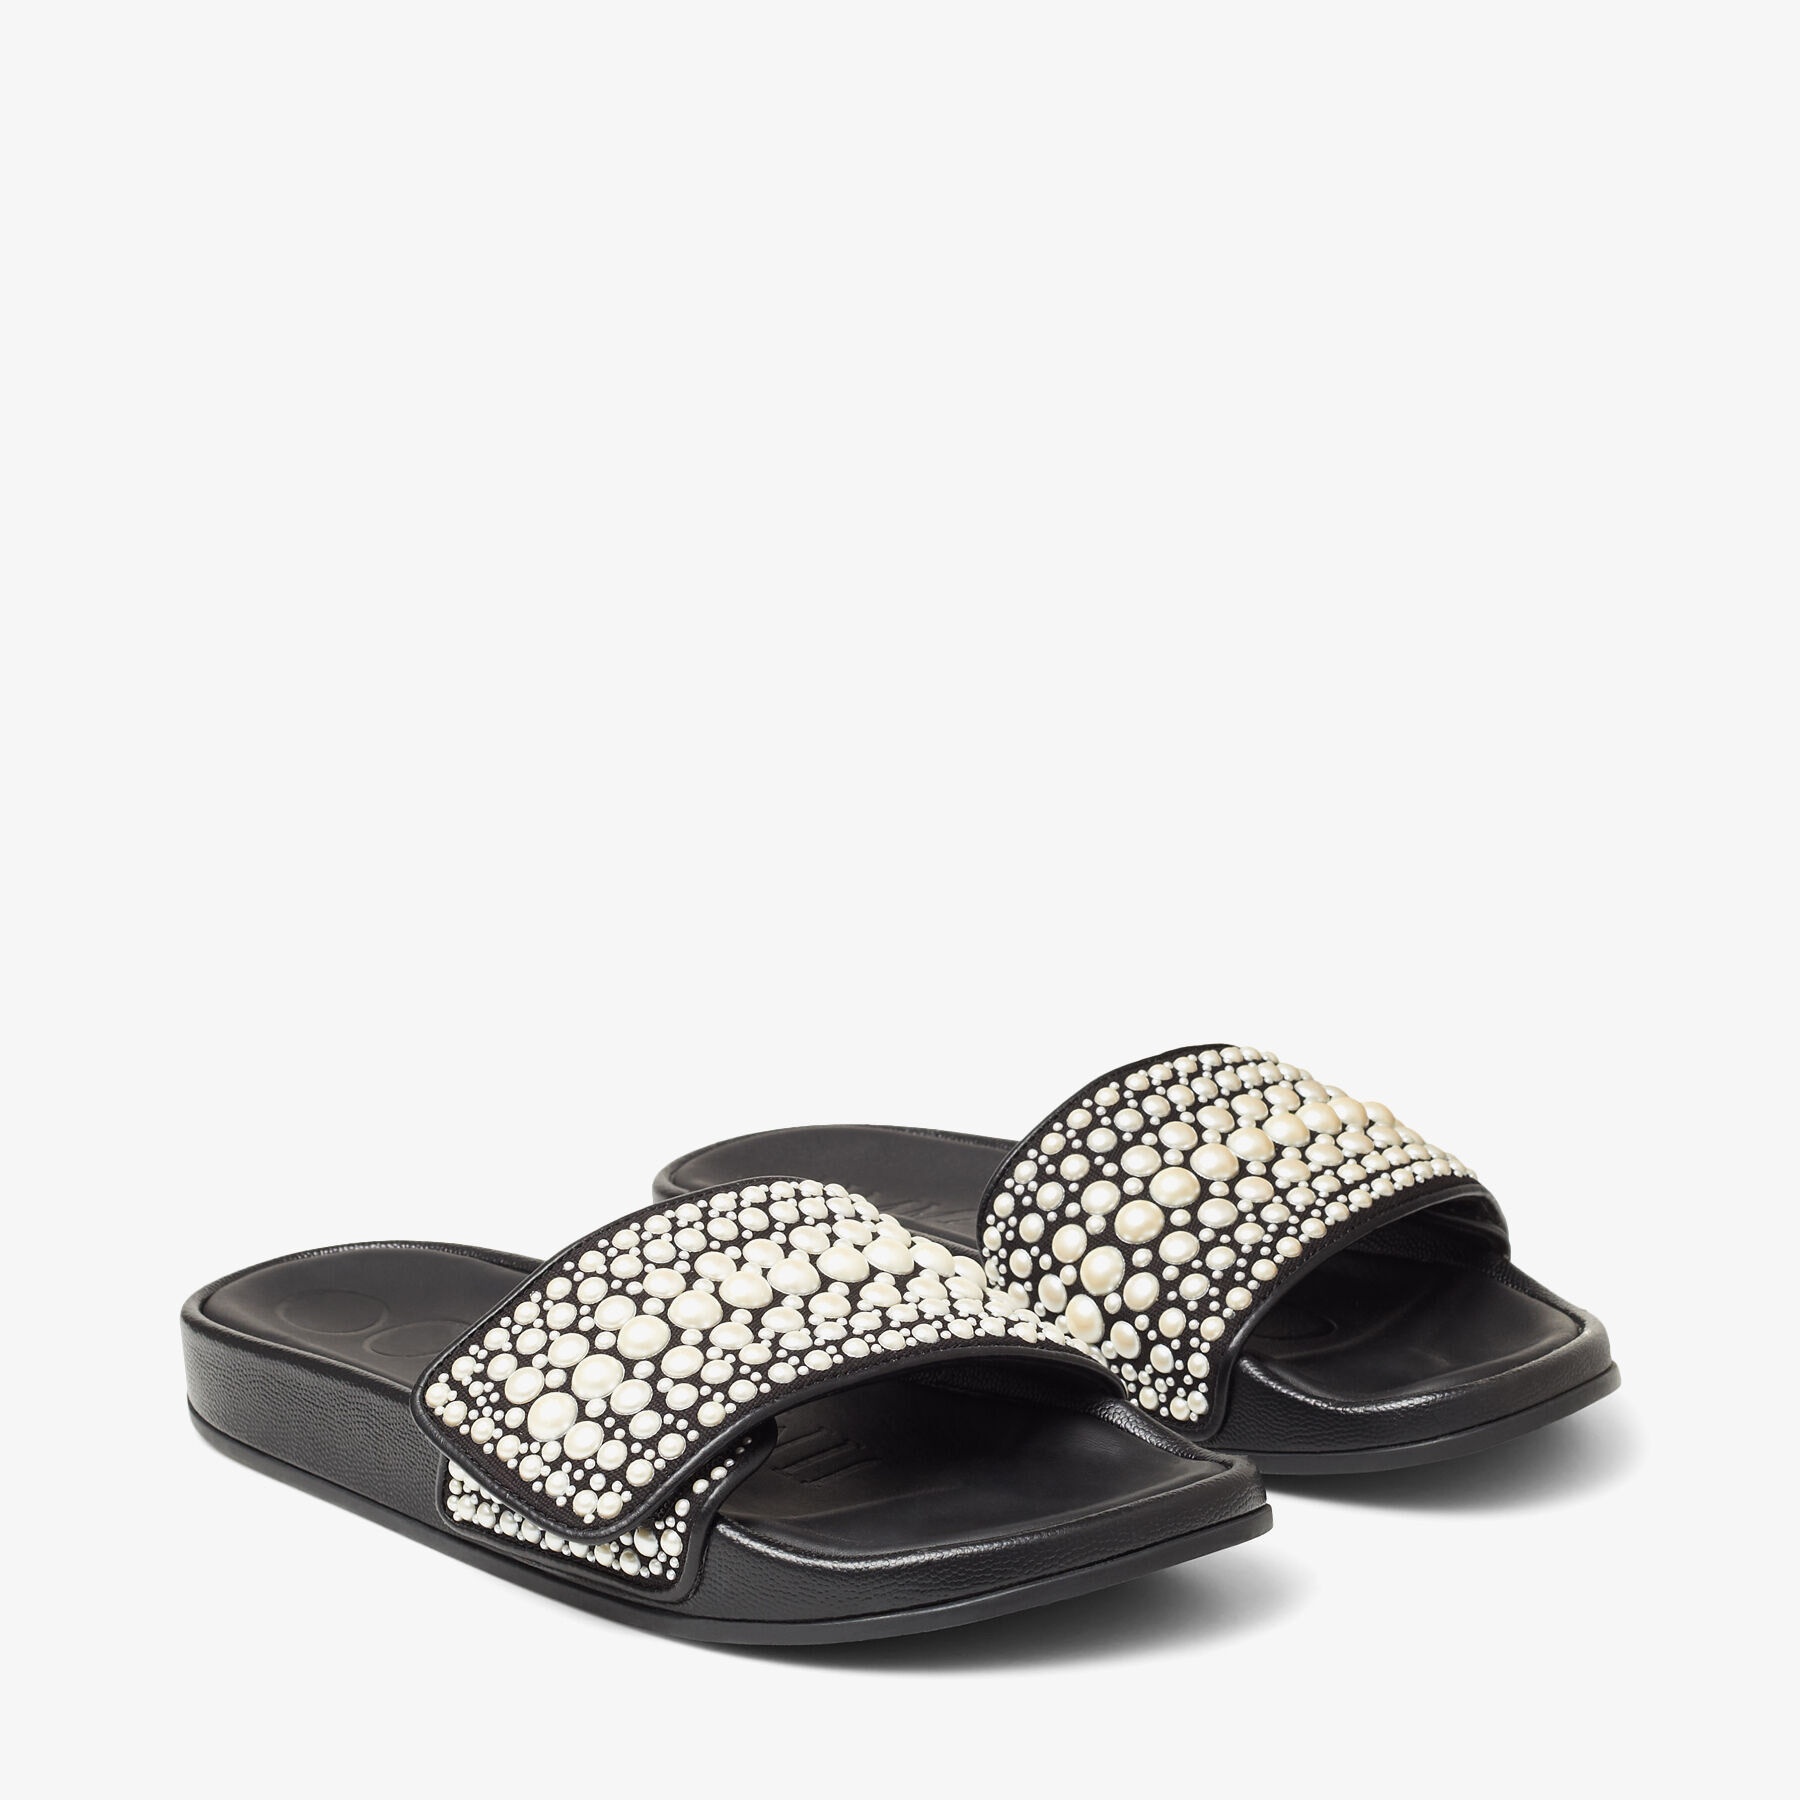 Fitz/F
Black Canvas and Leather Slides with Pearls - 3